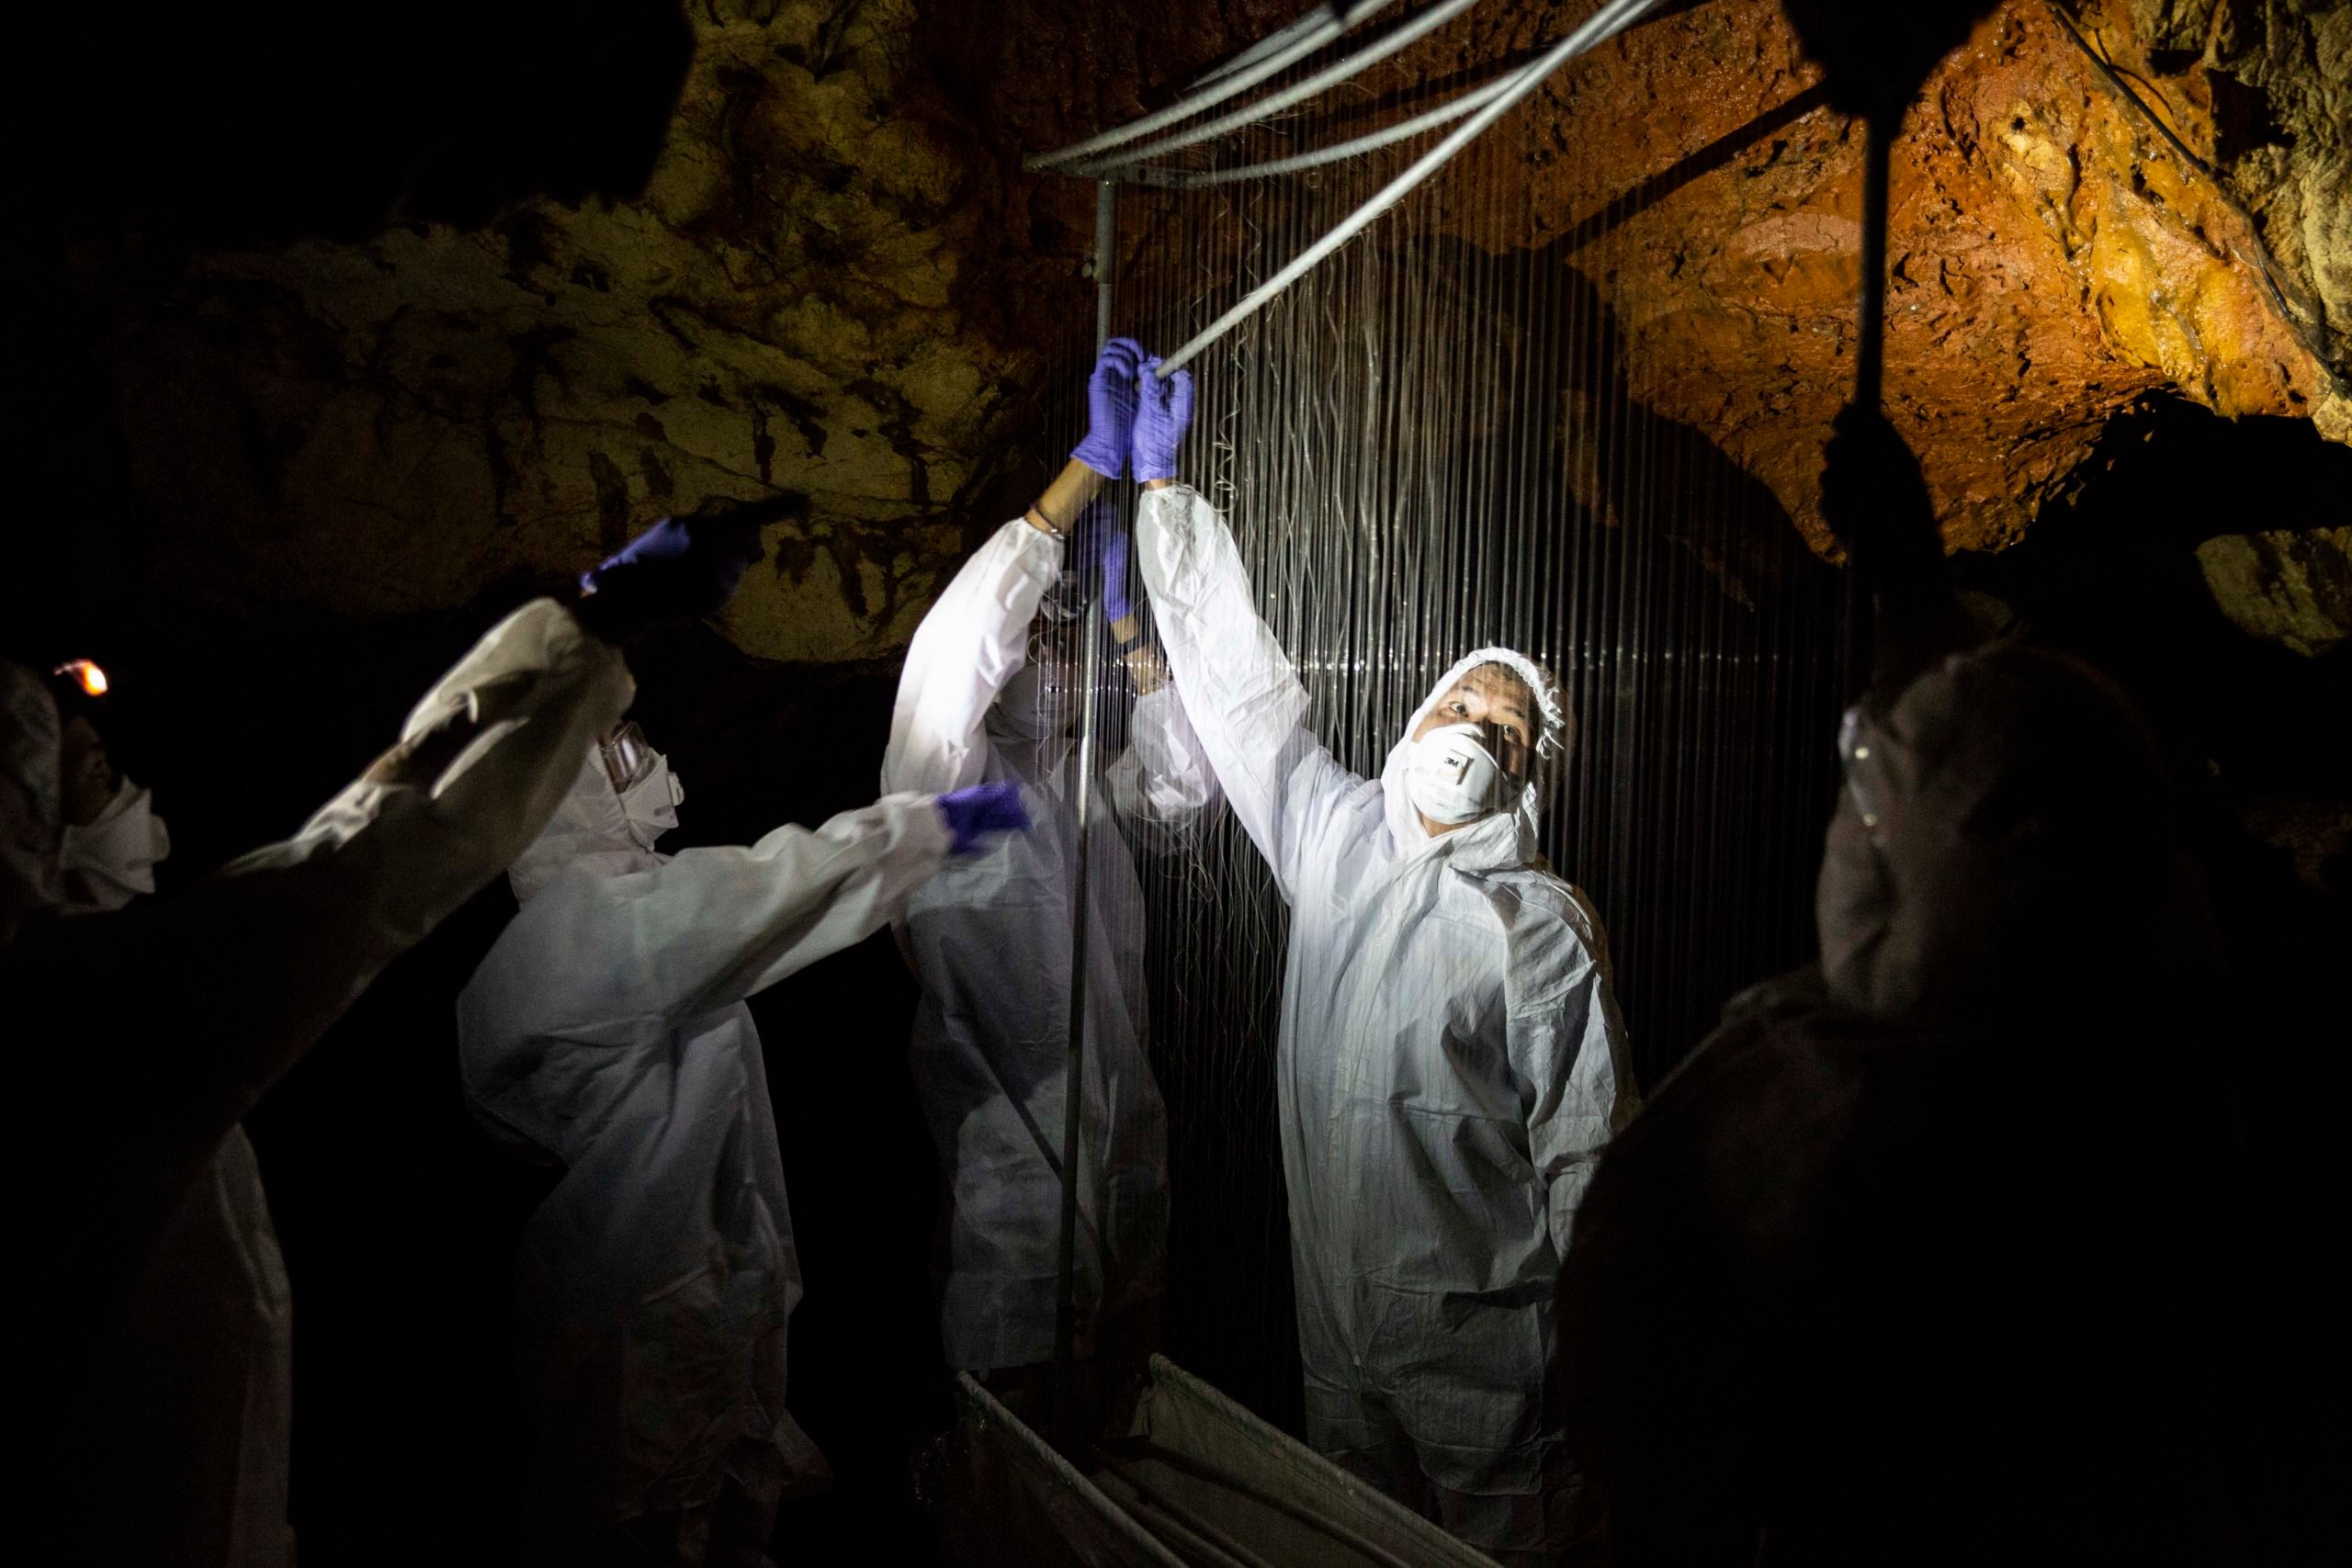 A team of researchers set up a net to catch bats at the Khao Chong Pran Cave on September 12, 2020 in Ratchaburi, Thailand. (Photo by Lauren DeCicca/Getty Images)